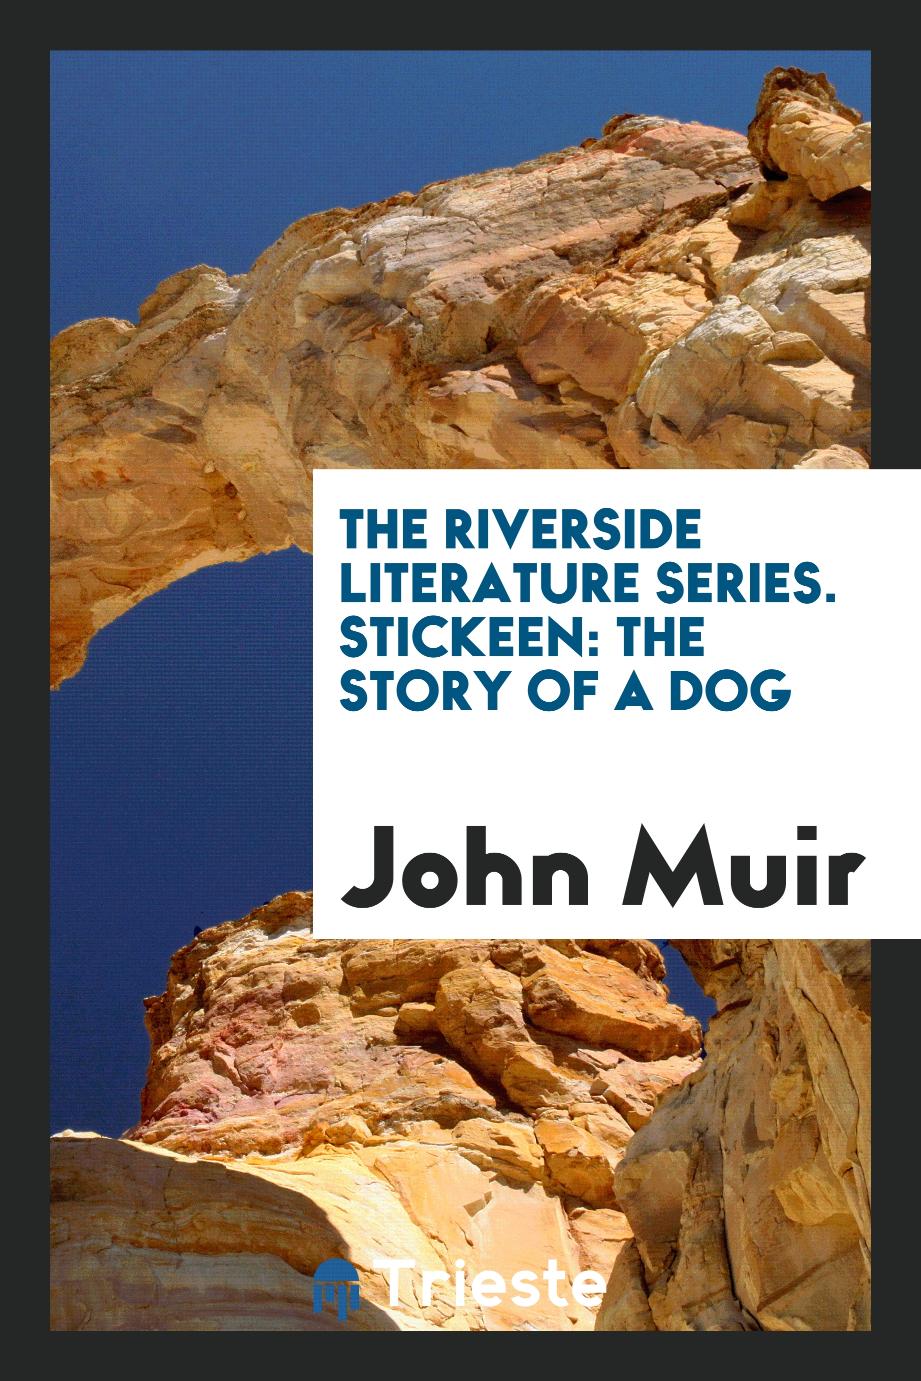 The Riverside Literature Series. Stickeen: The Story of a Dog